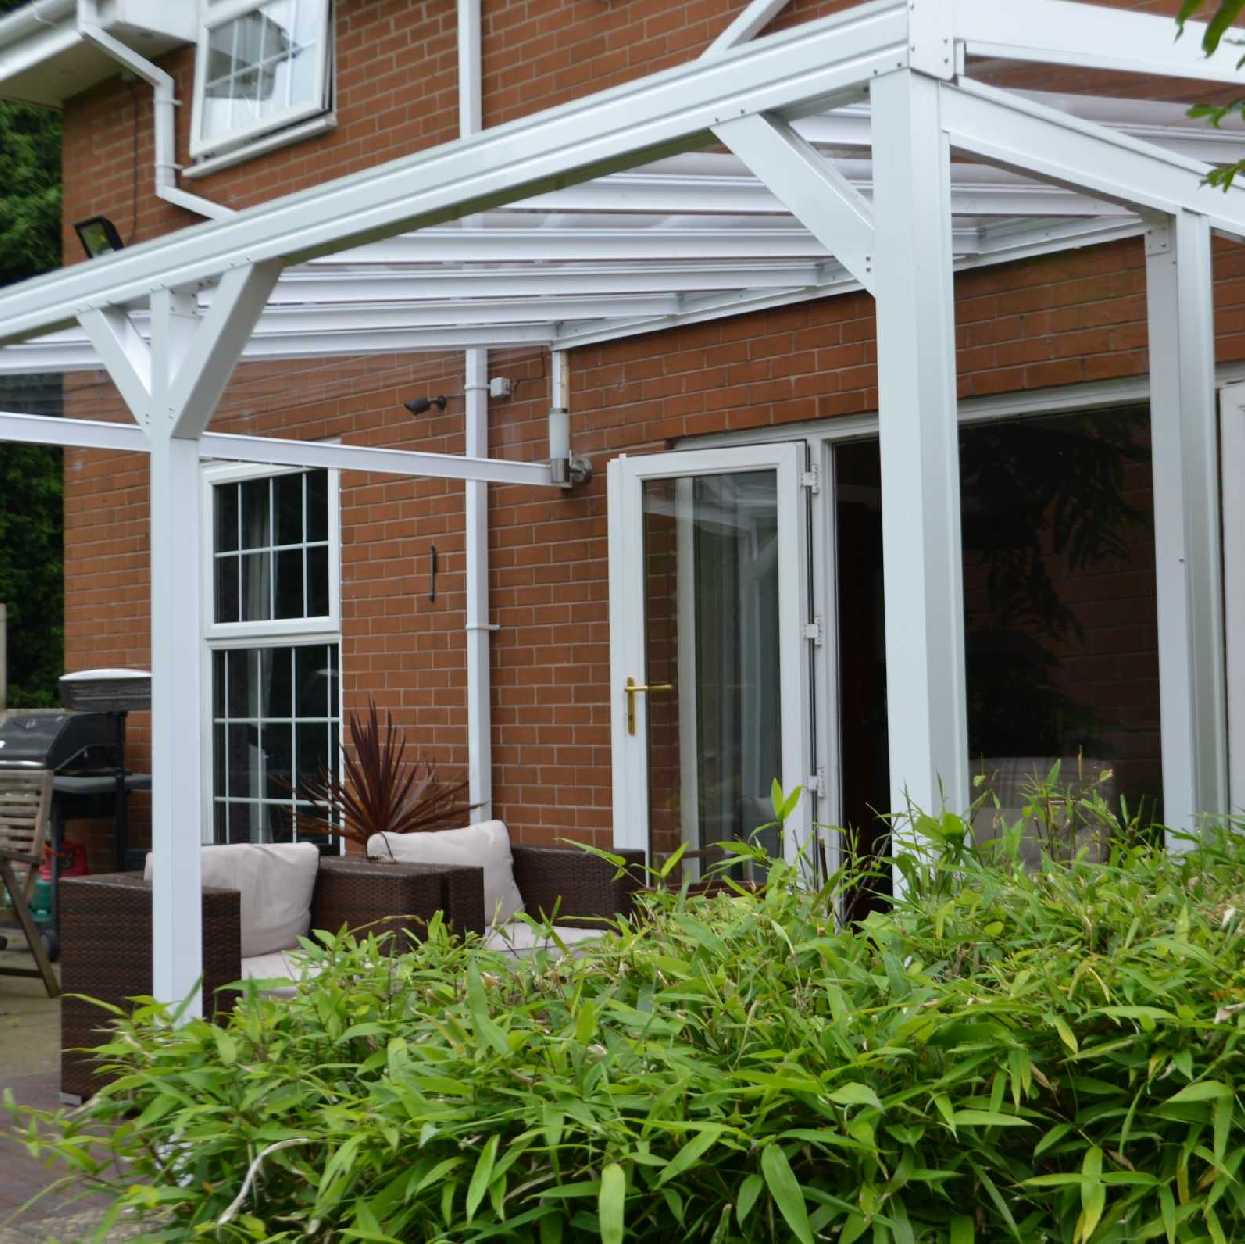 Omega Smart Lean-To Canopy, White with 6mm Glass Clear Plate Polycarbonate Glazing - 2.1m (W) x 3.0m (P), (2) Supporting Posts from Omega Build